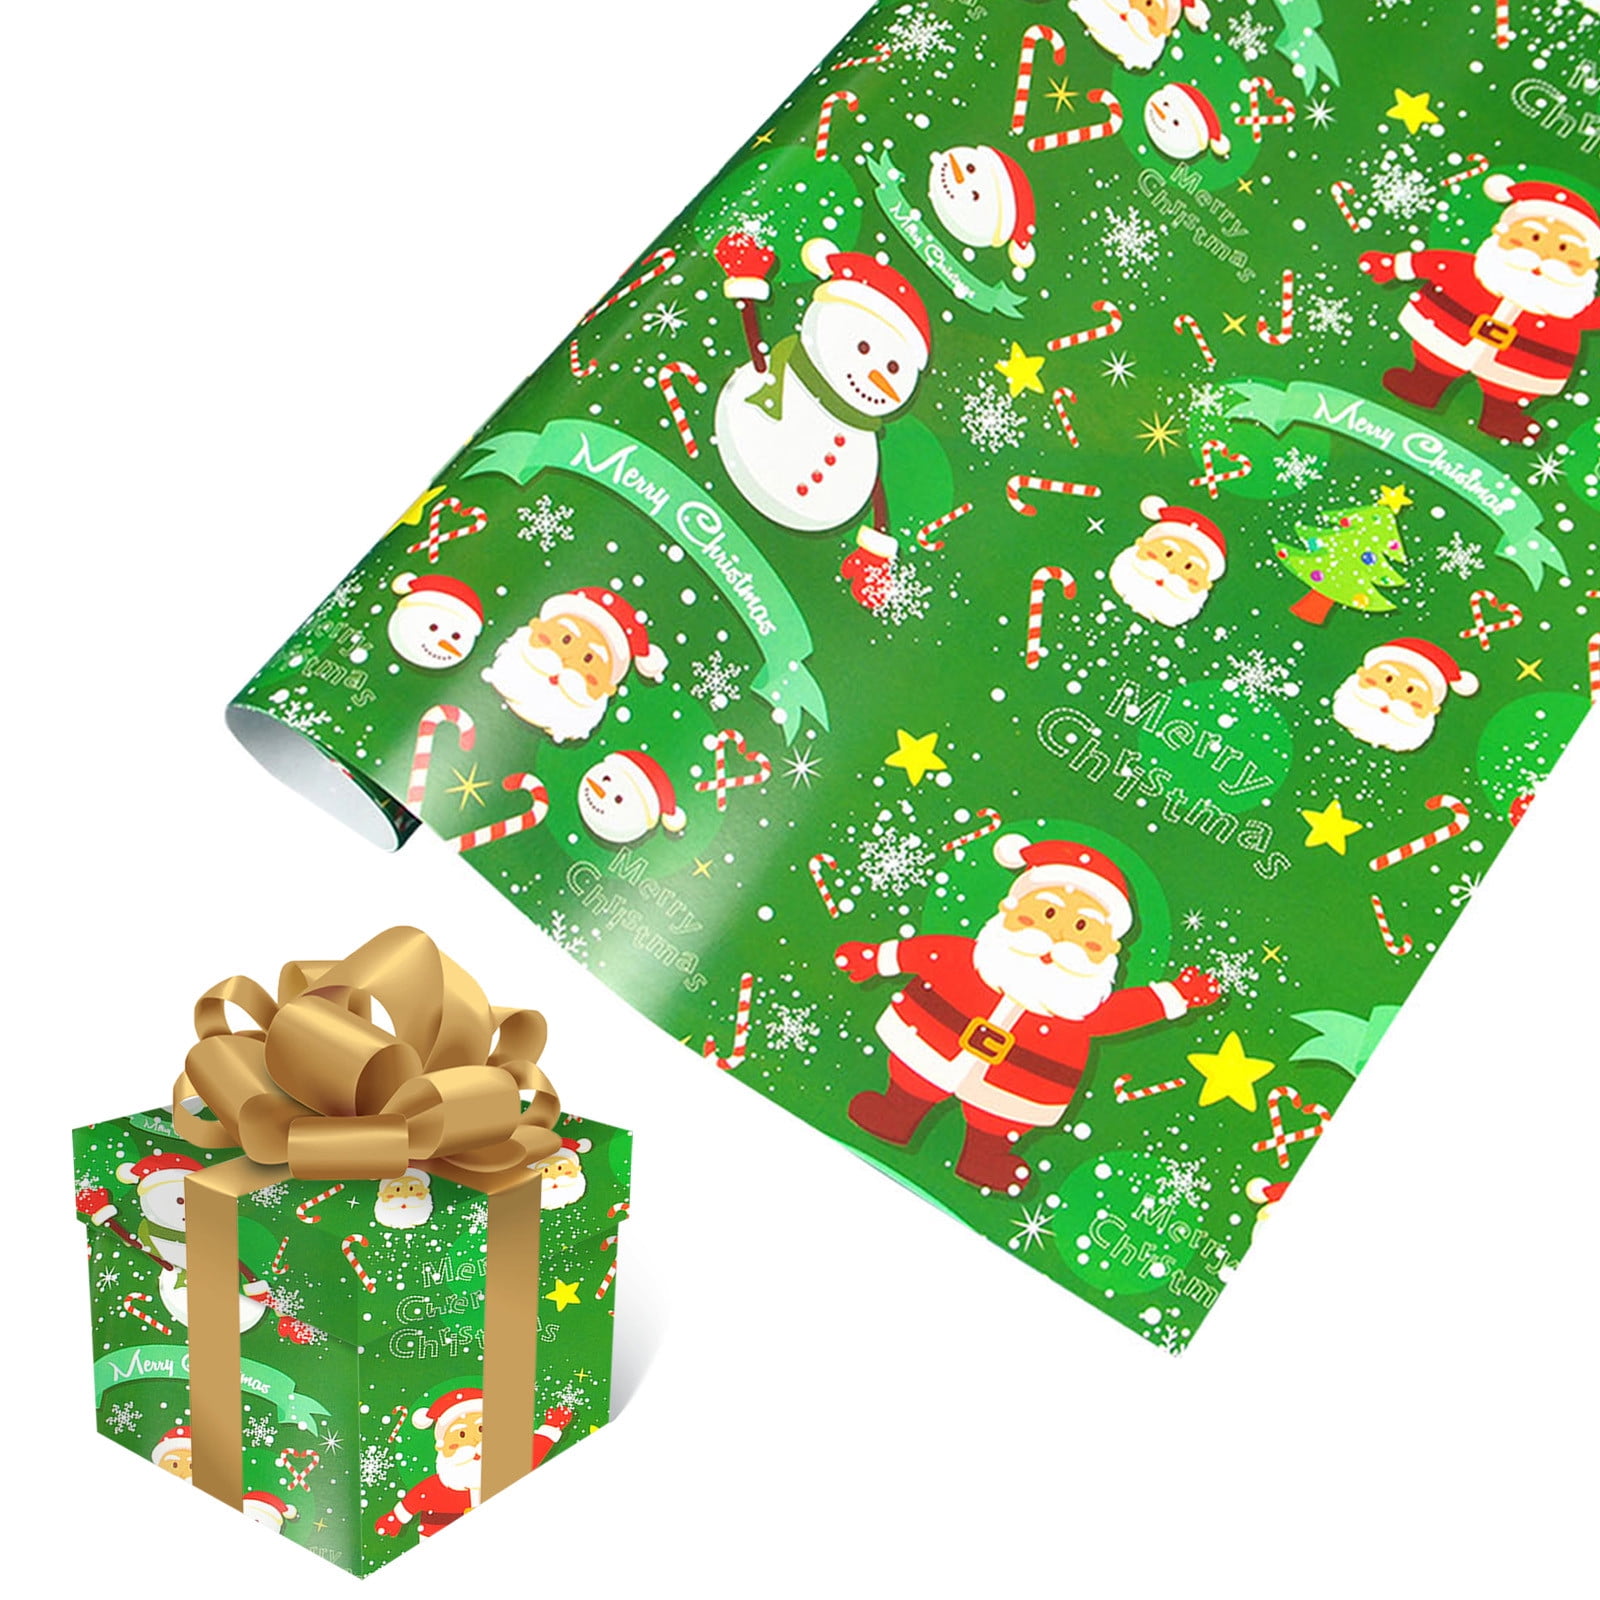 Sehao Desktop Ornament 5pcs ( 70cmX50cm)Single-sided Christmas Wrapping Paper, Classic Santa Claus and Patterns Home & Garden D, Size: One Size